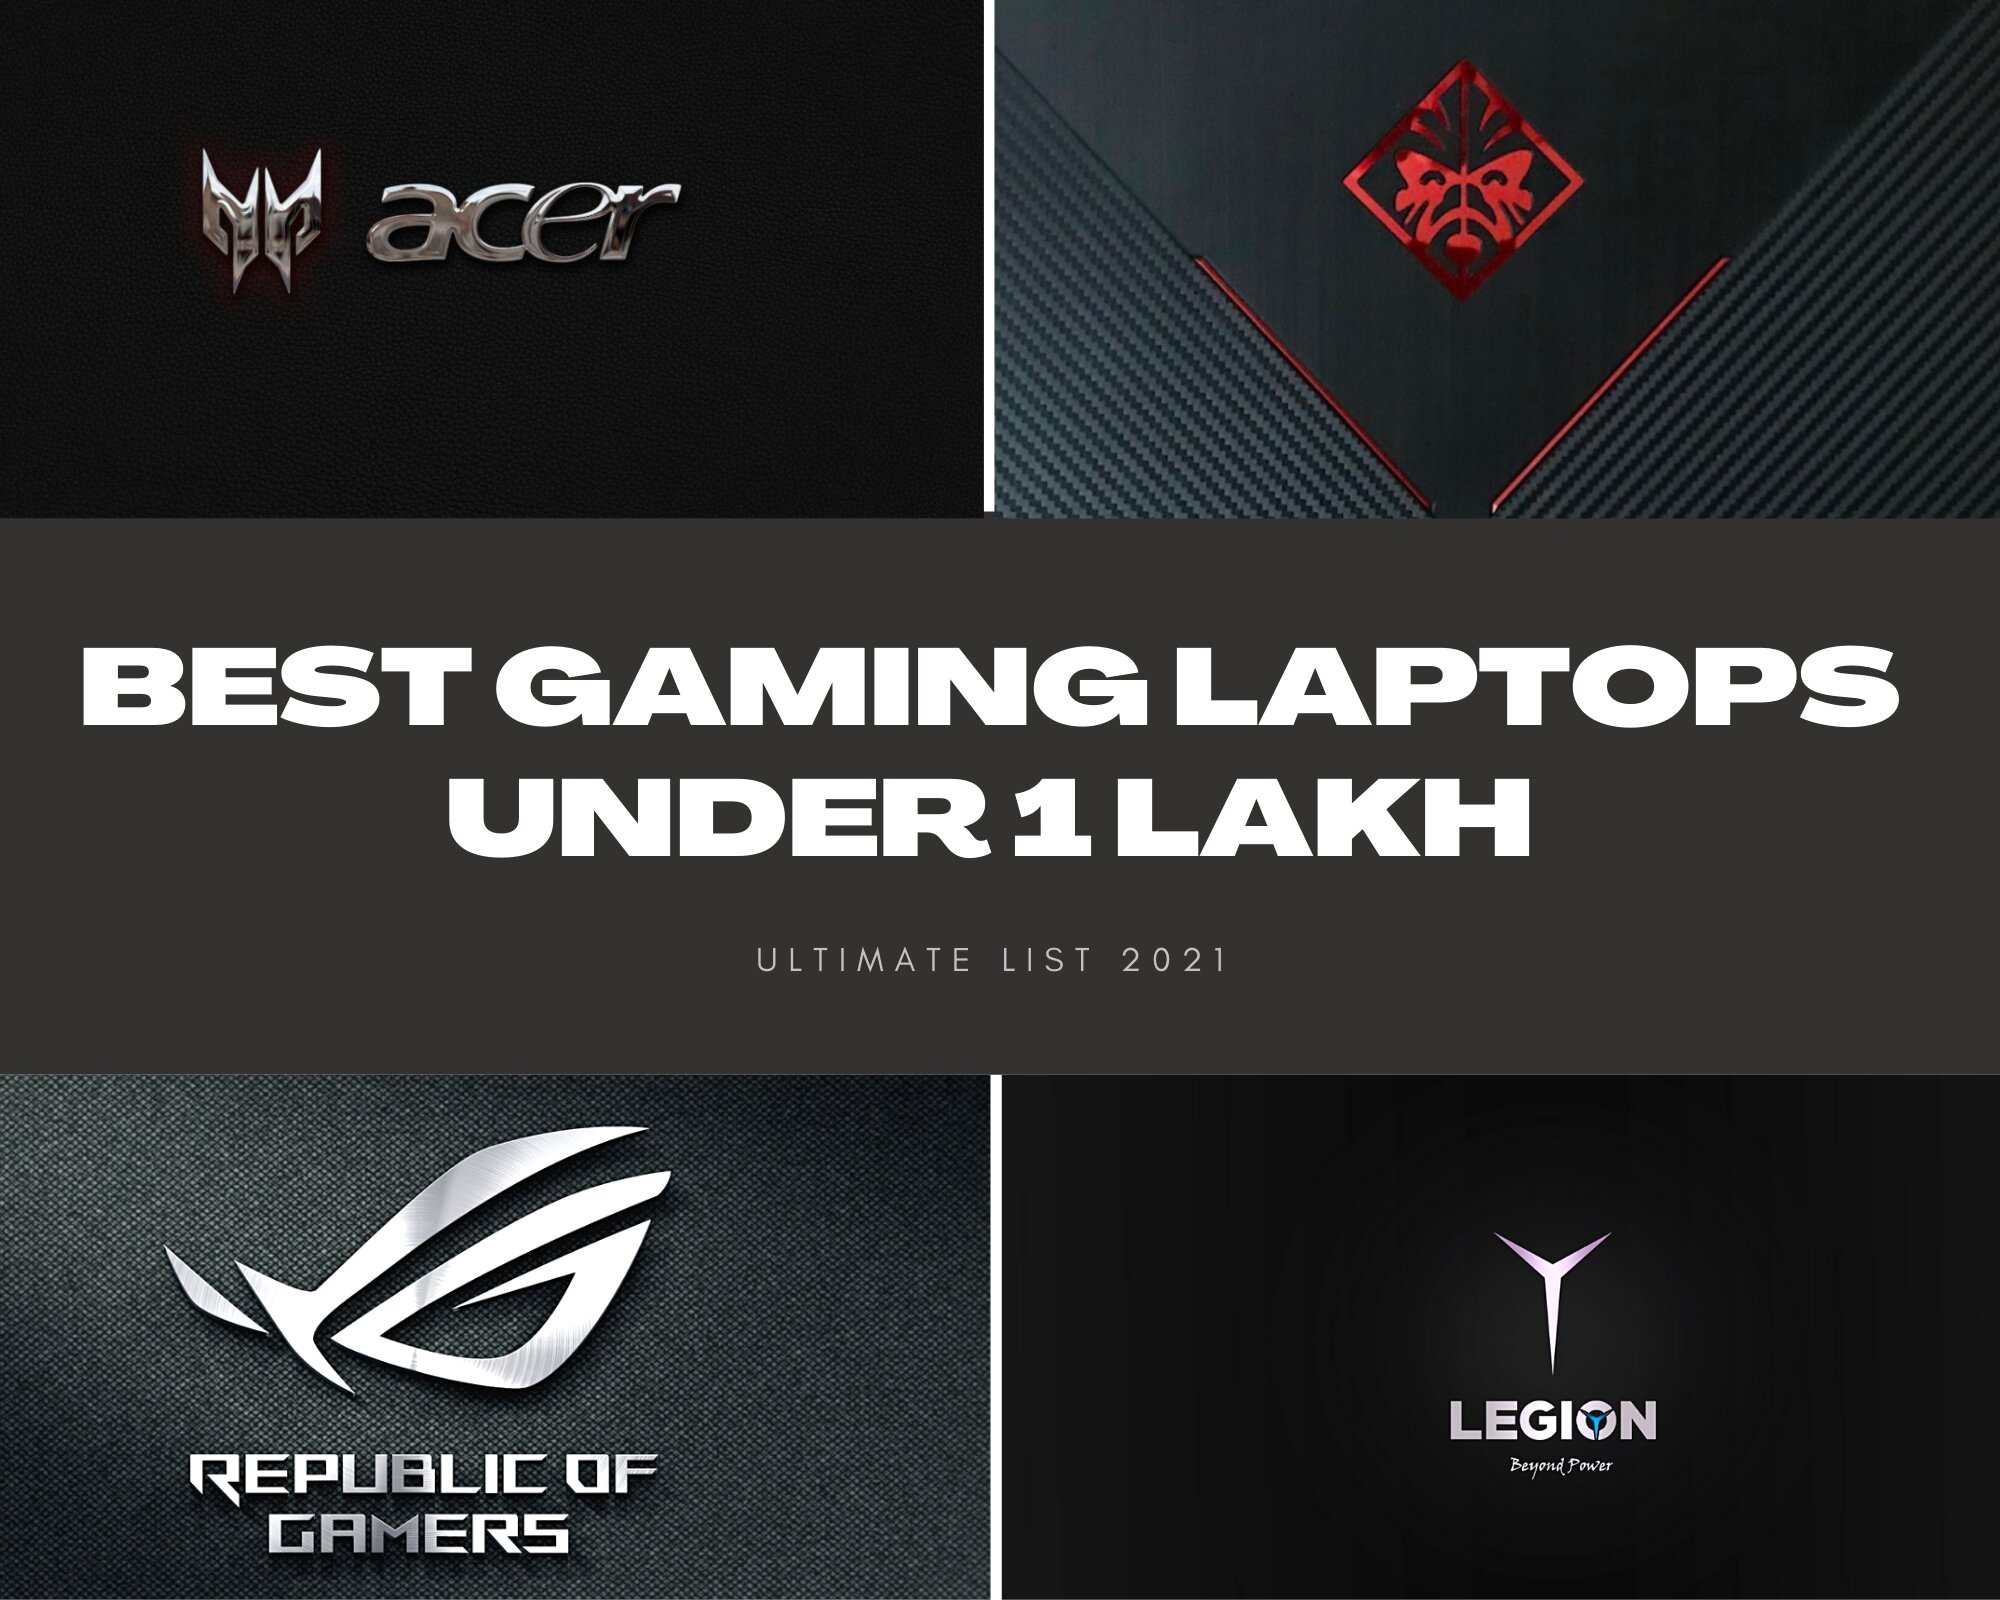 Best Gaming Laptops Under 1 Lakh Rupees - 2021 Edition